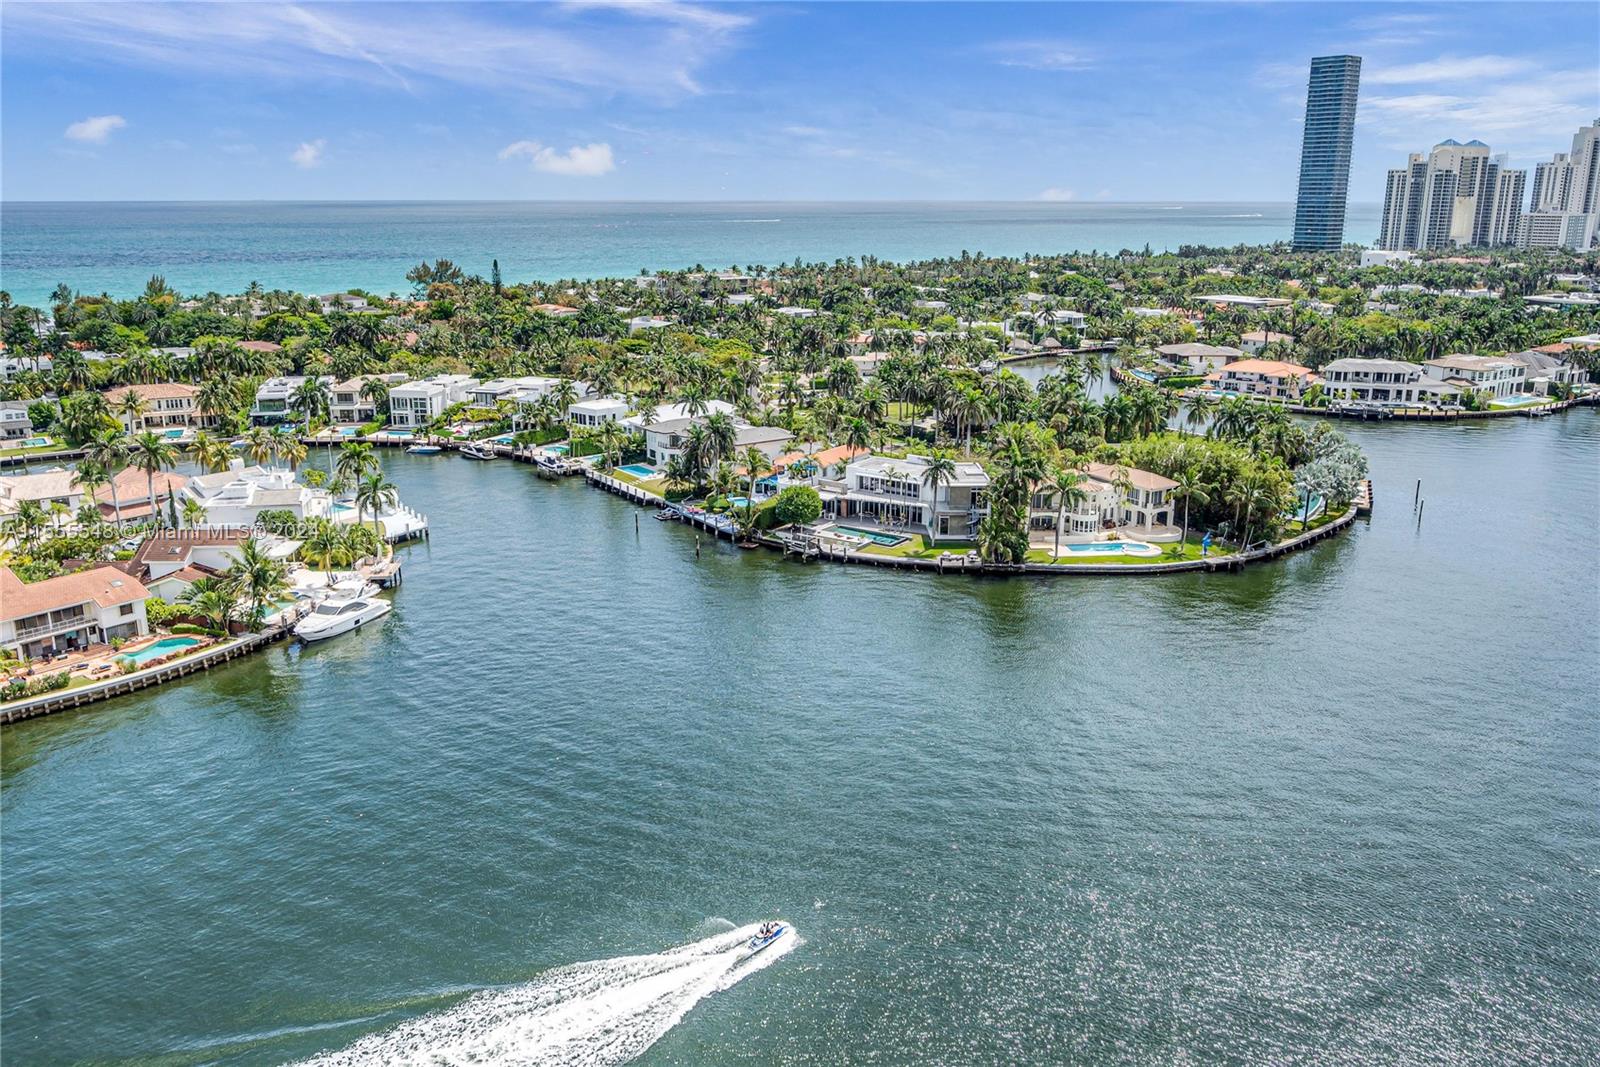 Step off your private elevator into this expansive waterfront residence offering 2 beds, a den + a home office, and 2.5 baths. Its flow-through floor plan allows you to enjoy water and city views. The East terrace faces serene sunrises over the Intracoastal and Atlantic, while the west terrace showcases captivating sunsets overlooking the Turnberry Golf Course and cityscape. Features include marble floors, electric blinds, built-in wet bar, stainless steel appliances, a spacious primary suite with walk-in closet, a bathroom with dual vanities, 2 Assigned parking spaces and storage. Amenities include 24 hr security, valet, infinity pool, theater, tennis courts, gym, clubhouse, and exclusive restaurant. Minutes from the beach and a scenic walking path, it's the epitome of leisure and luxury.